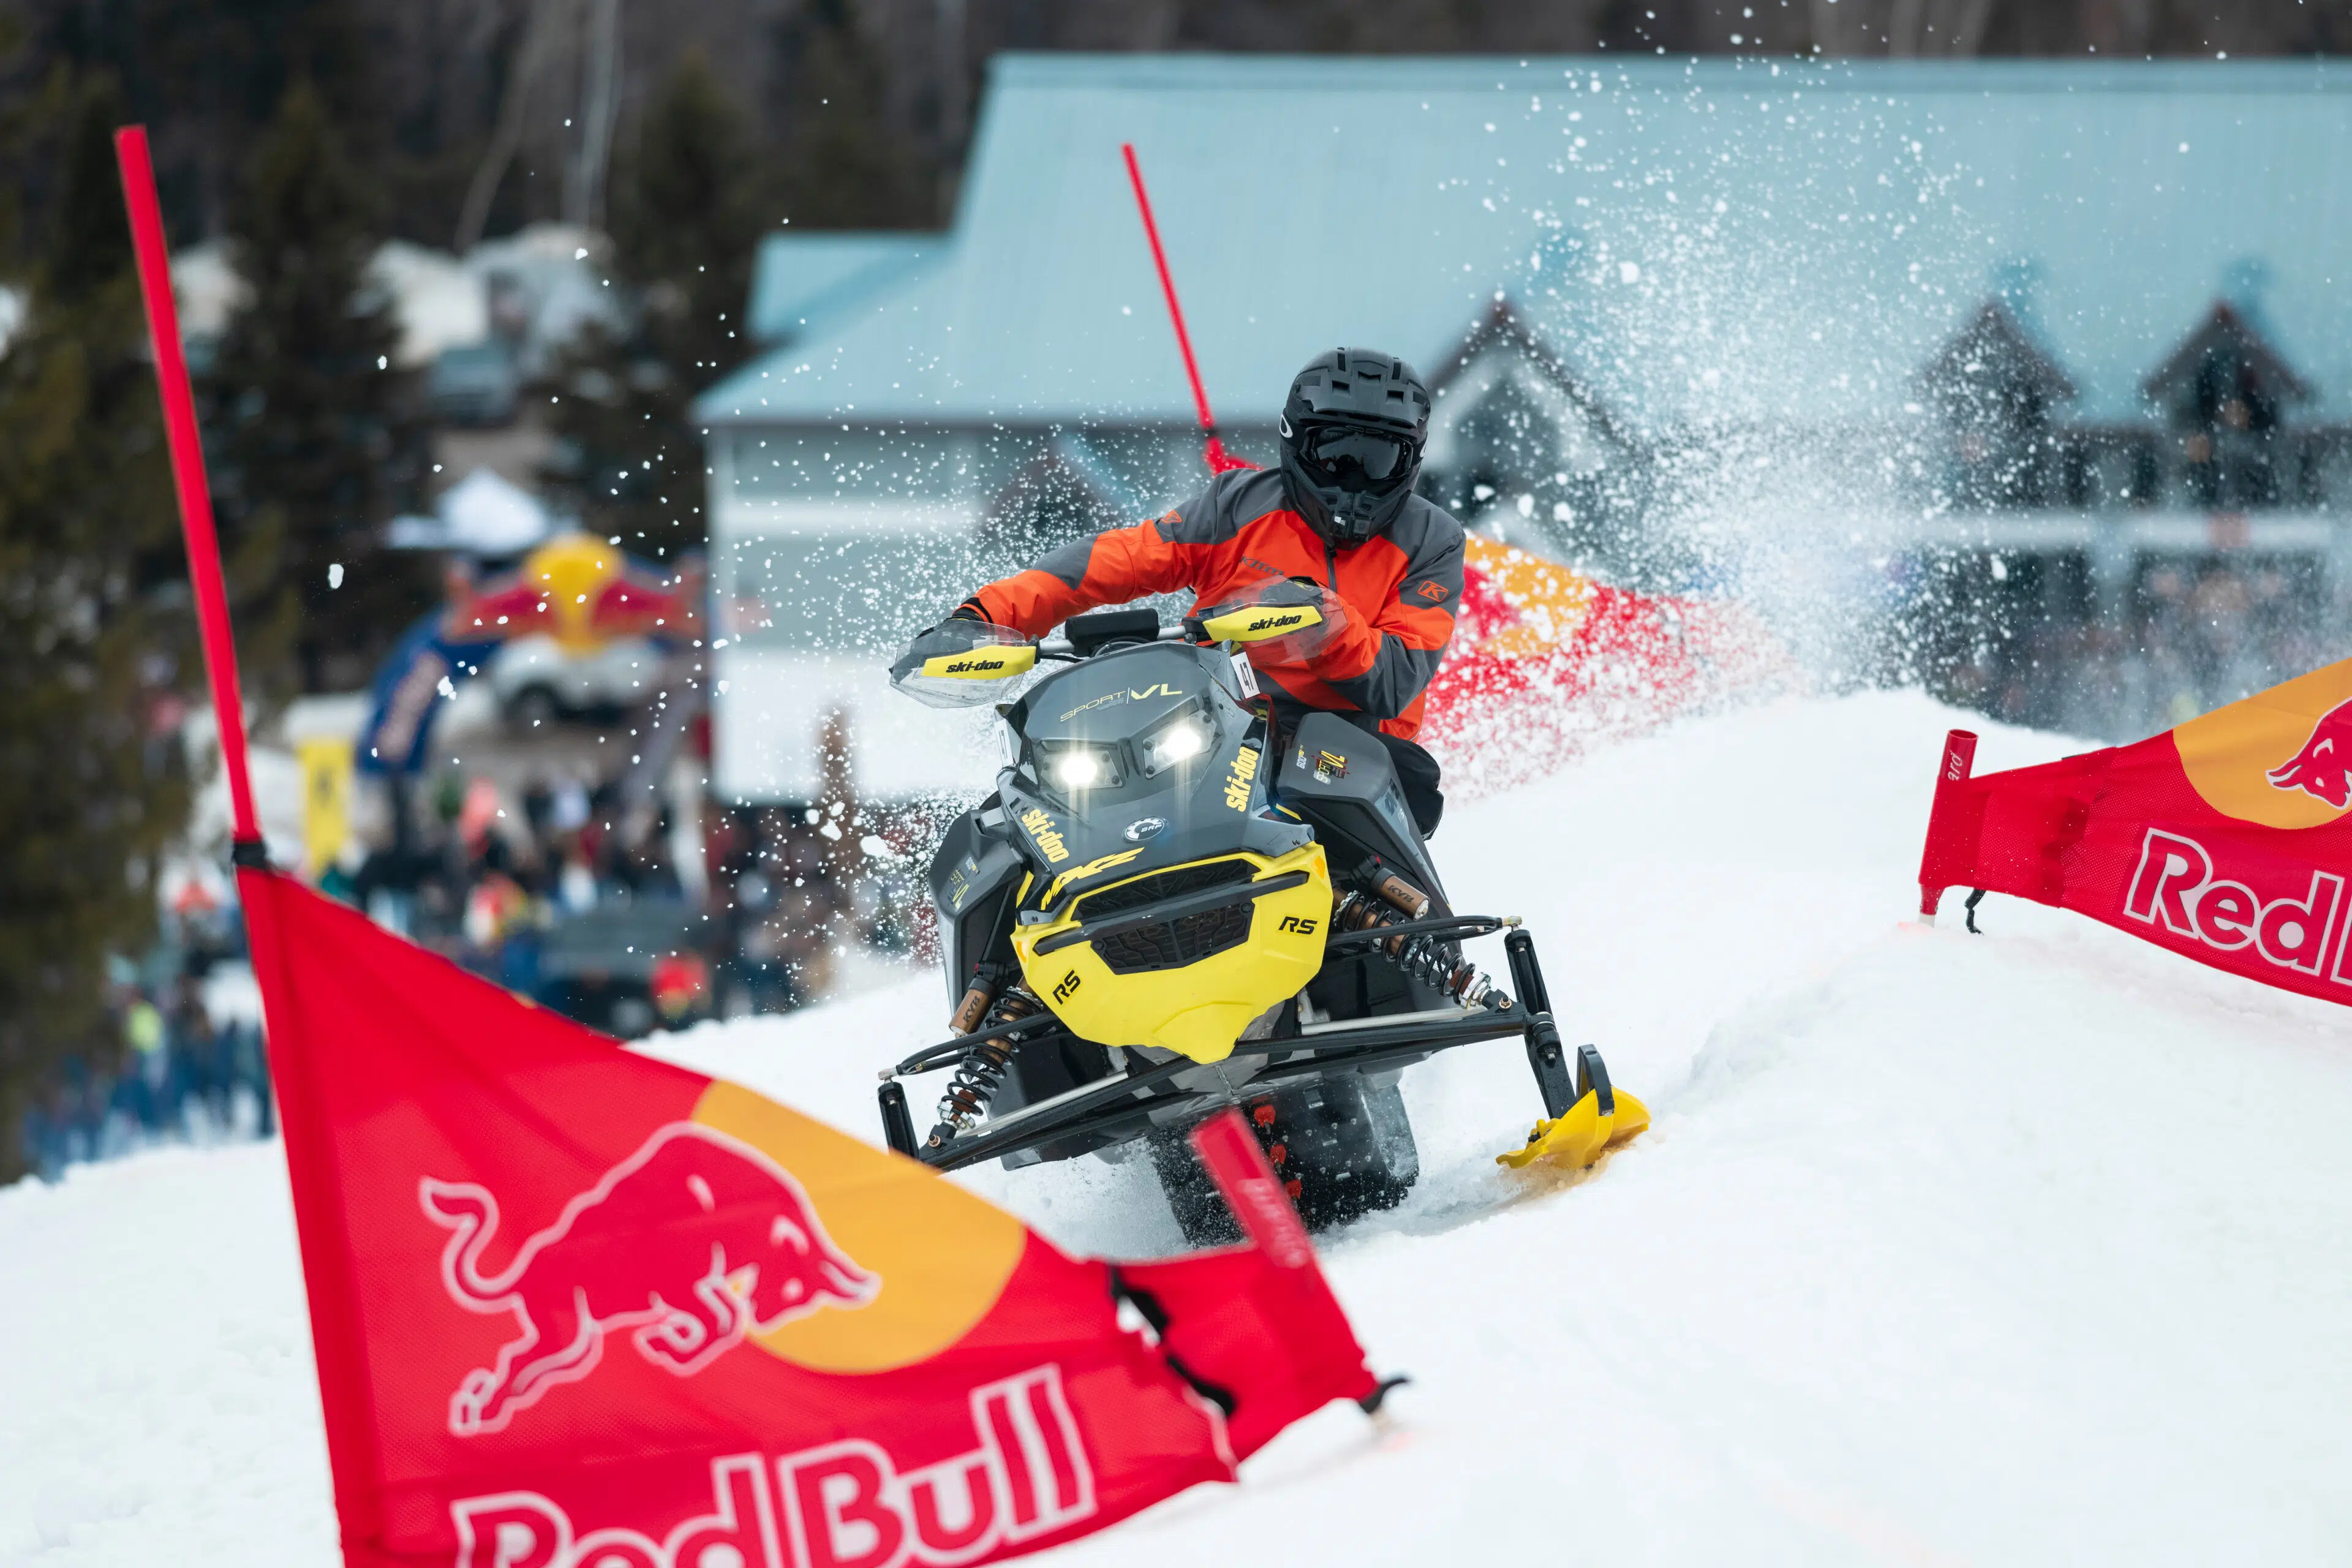 Charles-Julien Beaulieu competes at Red Bull Sledhammers at Ski La Réserve, in Saint-Donat, Quebec, Canada, on April 6, 2019. Photographer Credit: Felix Rioux / Red Bull Content Pool